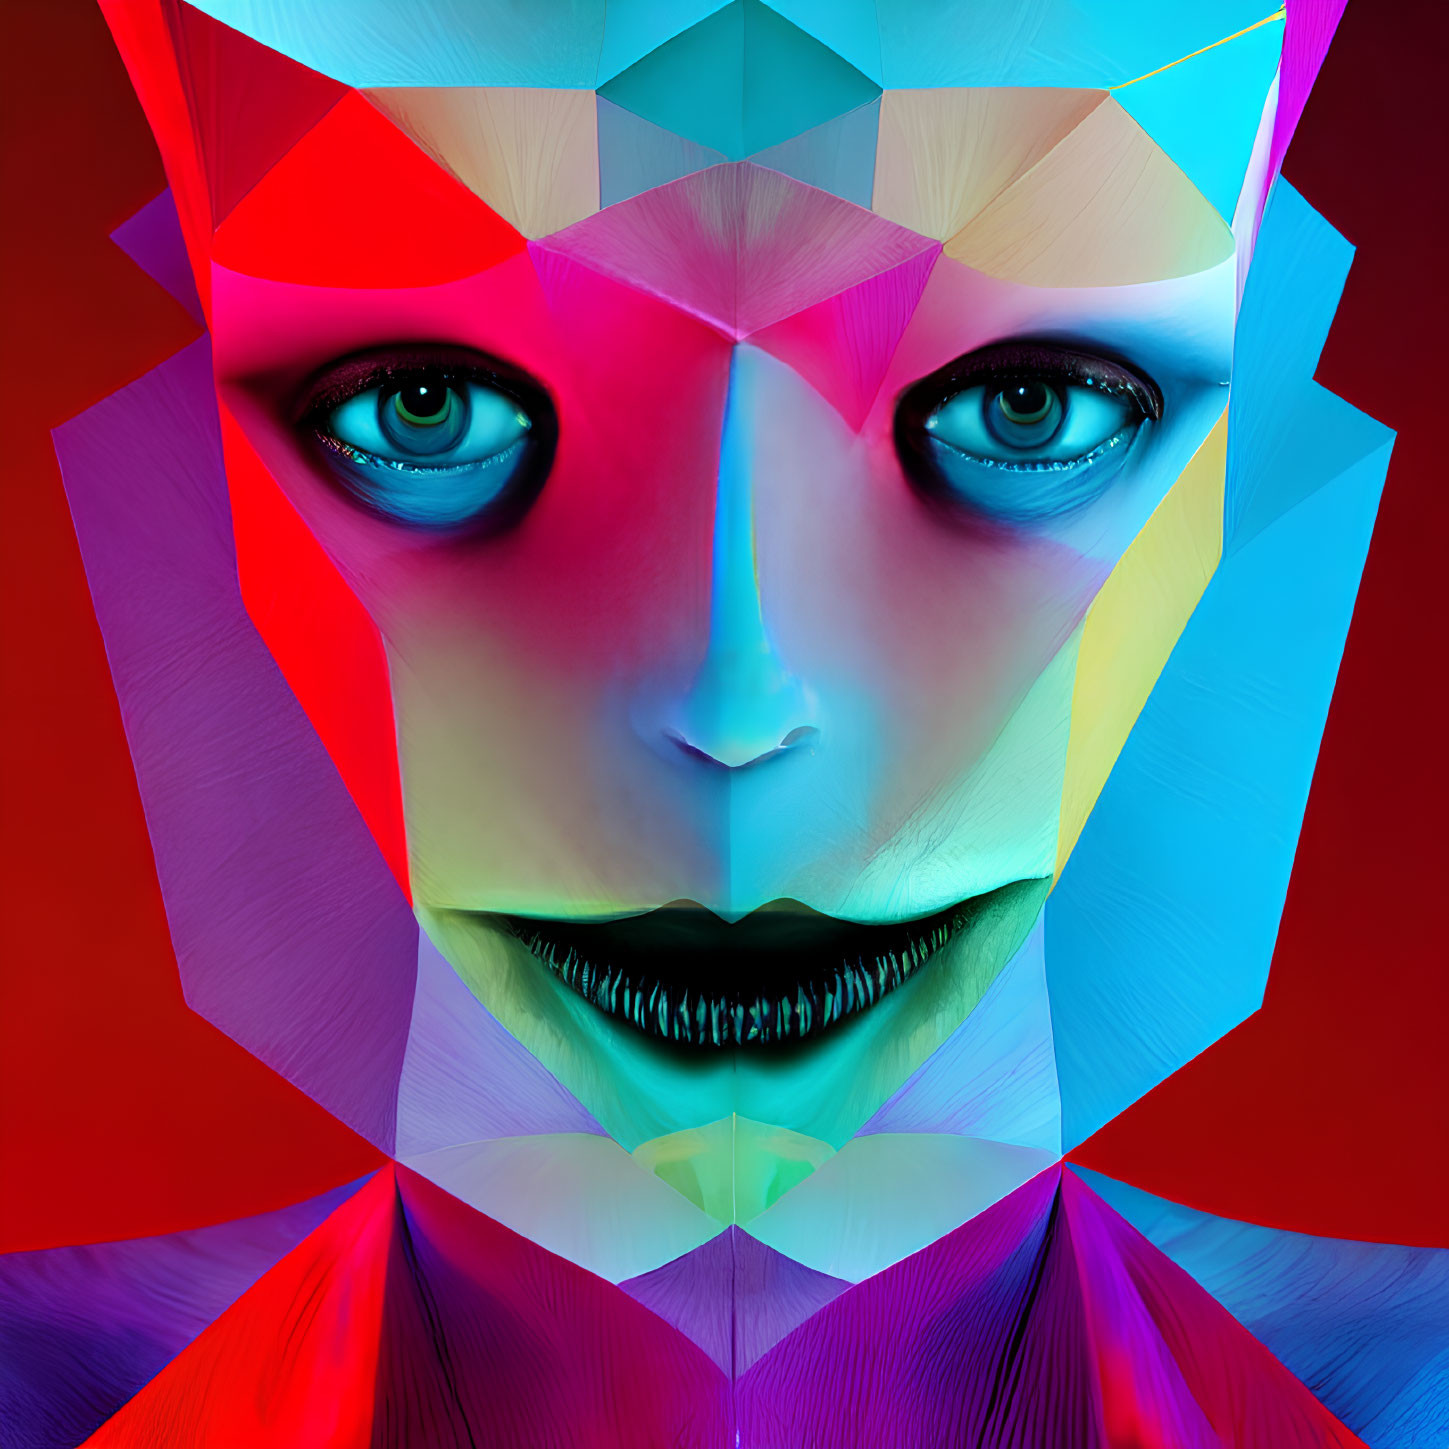 Vivid geometric digital art of a human face with red, blue, and yellow hues